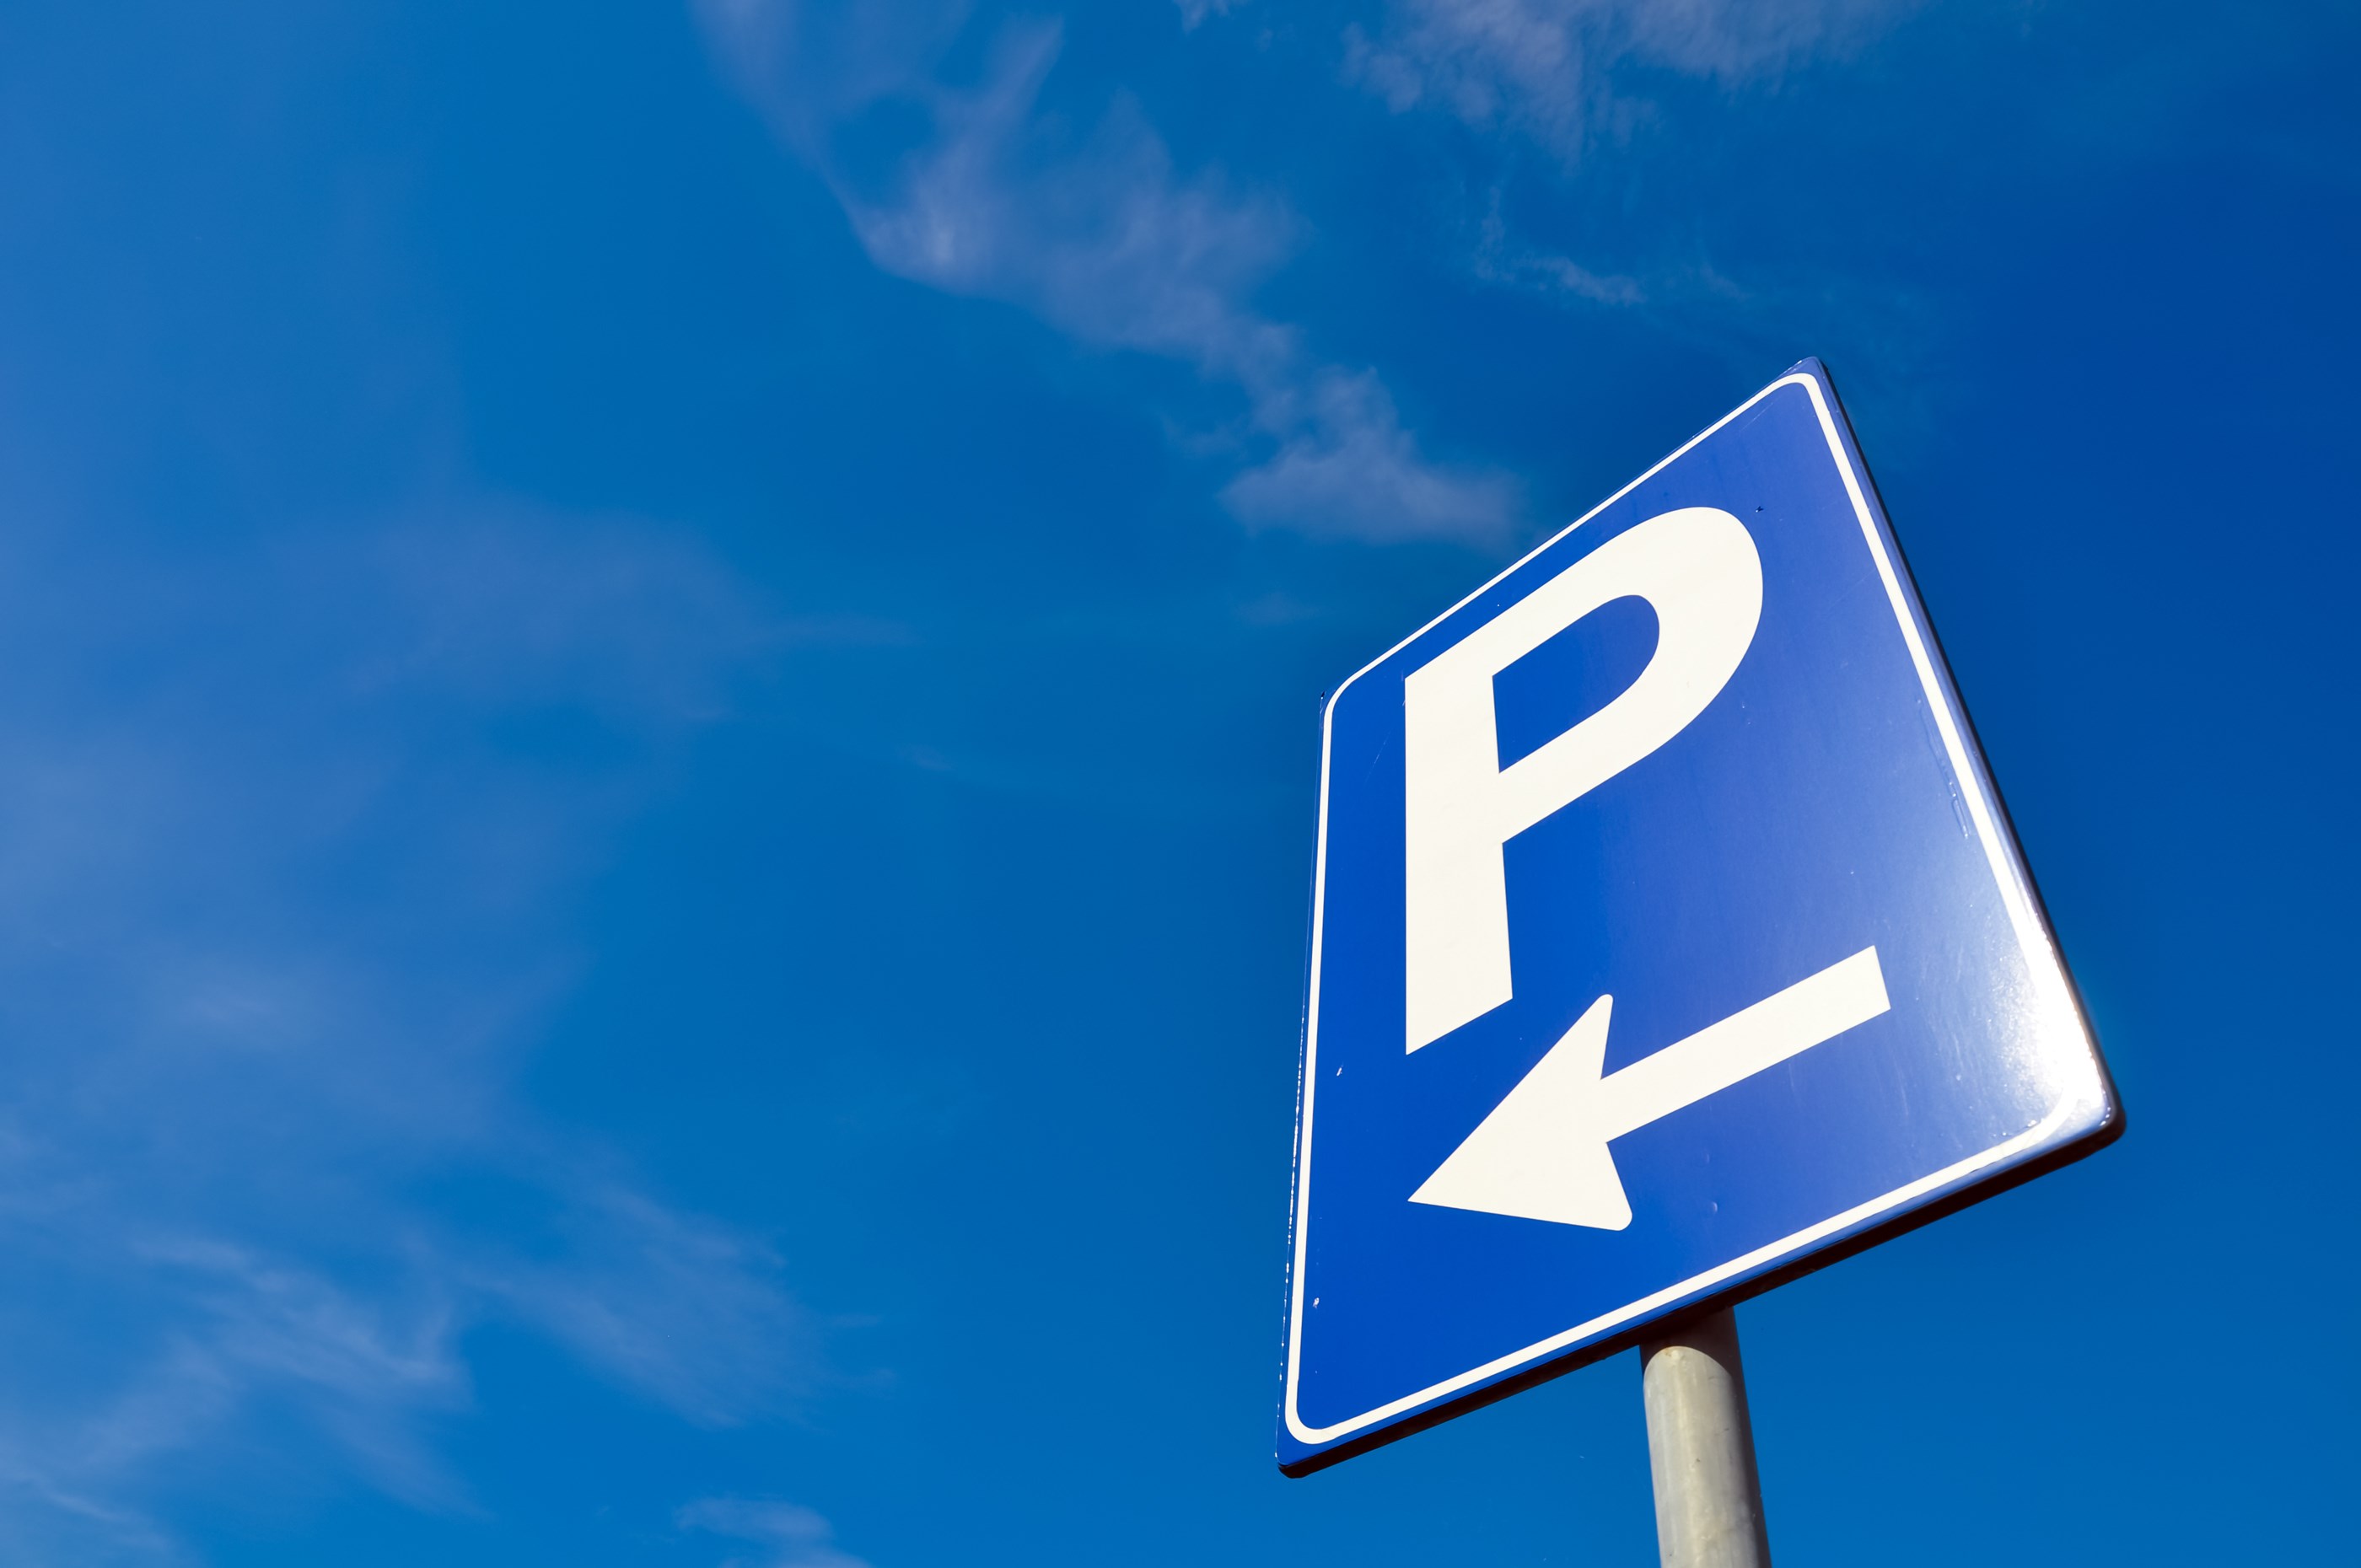 Parking sign with blue sky background